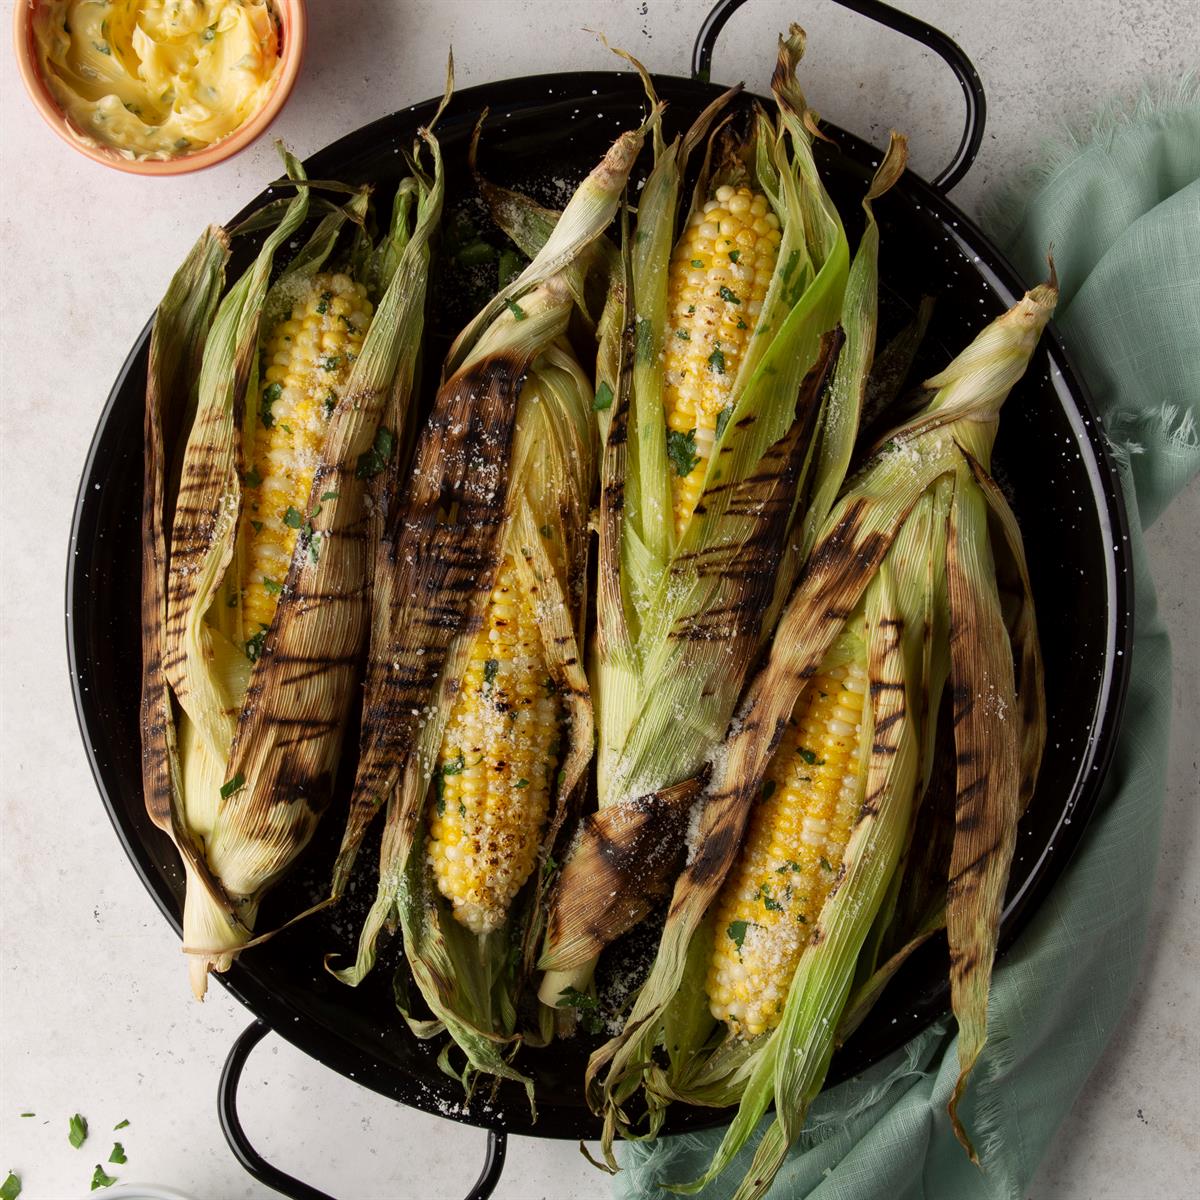 Grilled Corn In Husks Recipe Taste Of Home,Simple Origami For Beginners